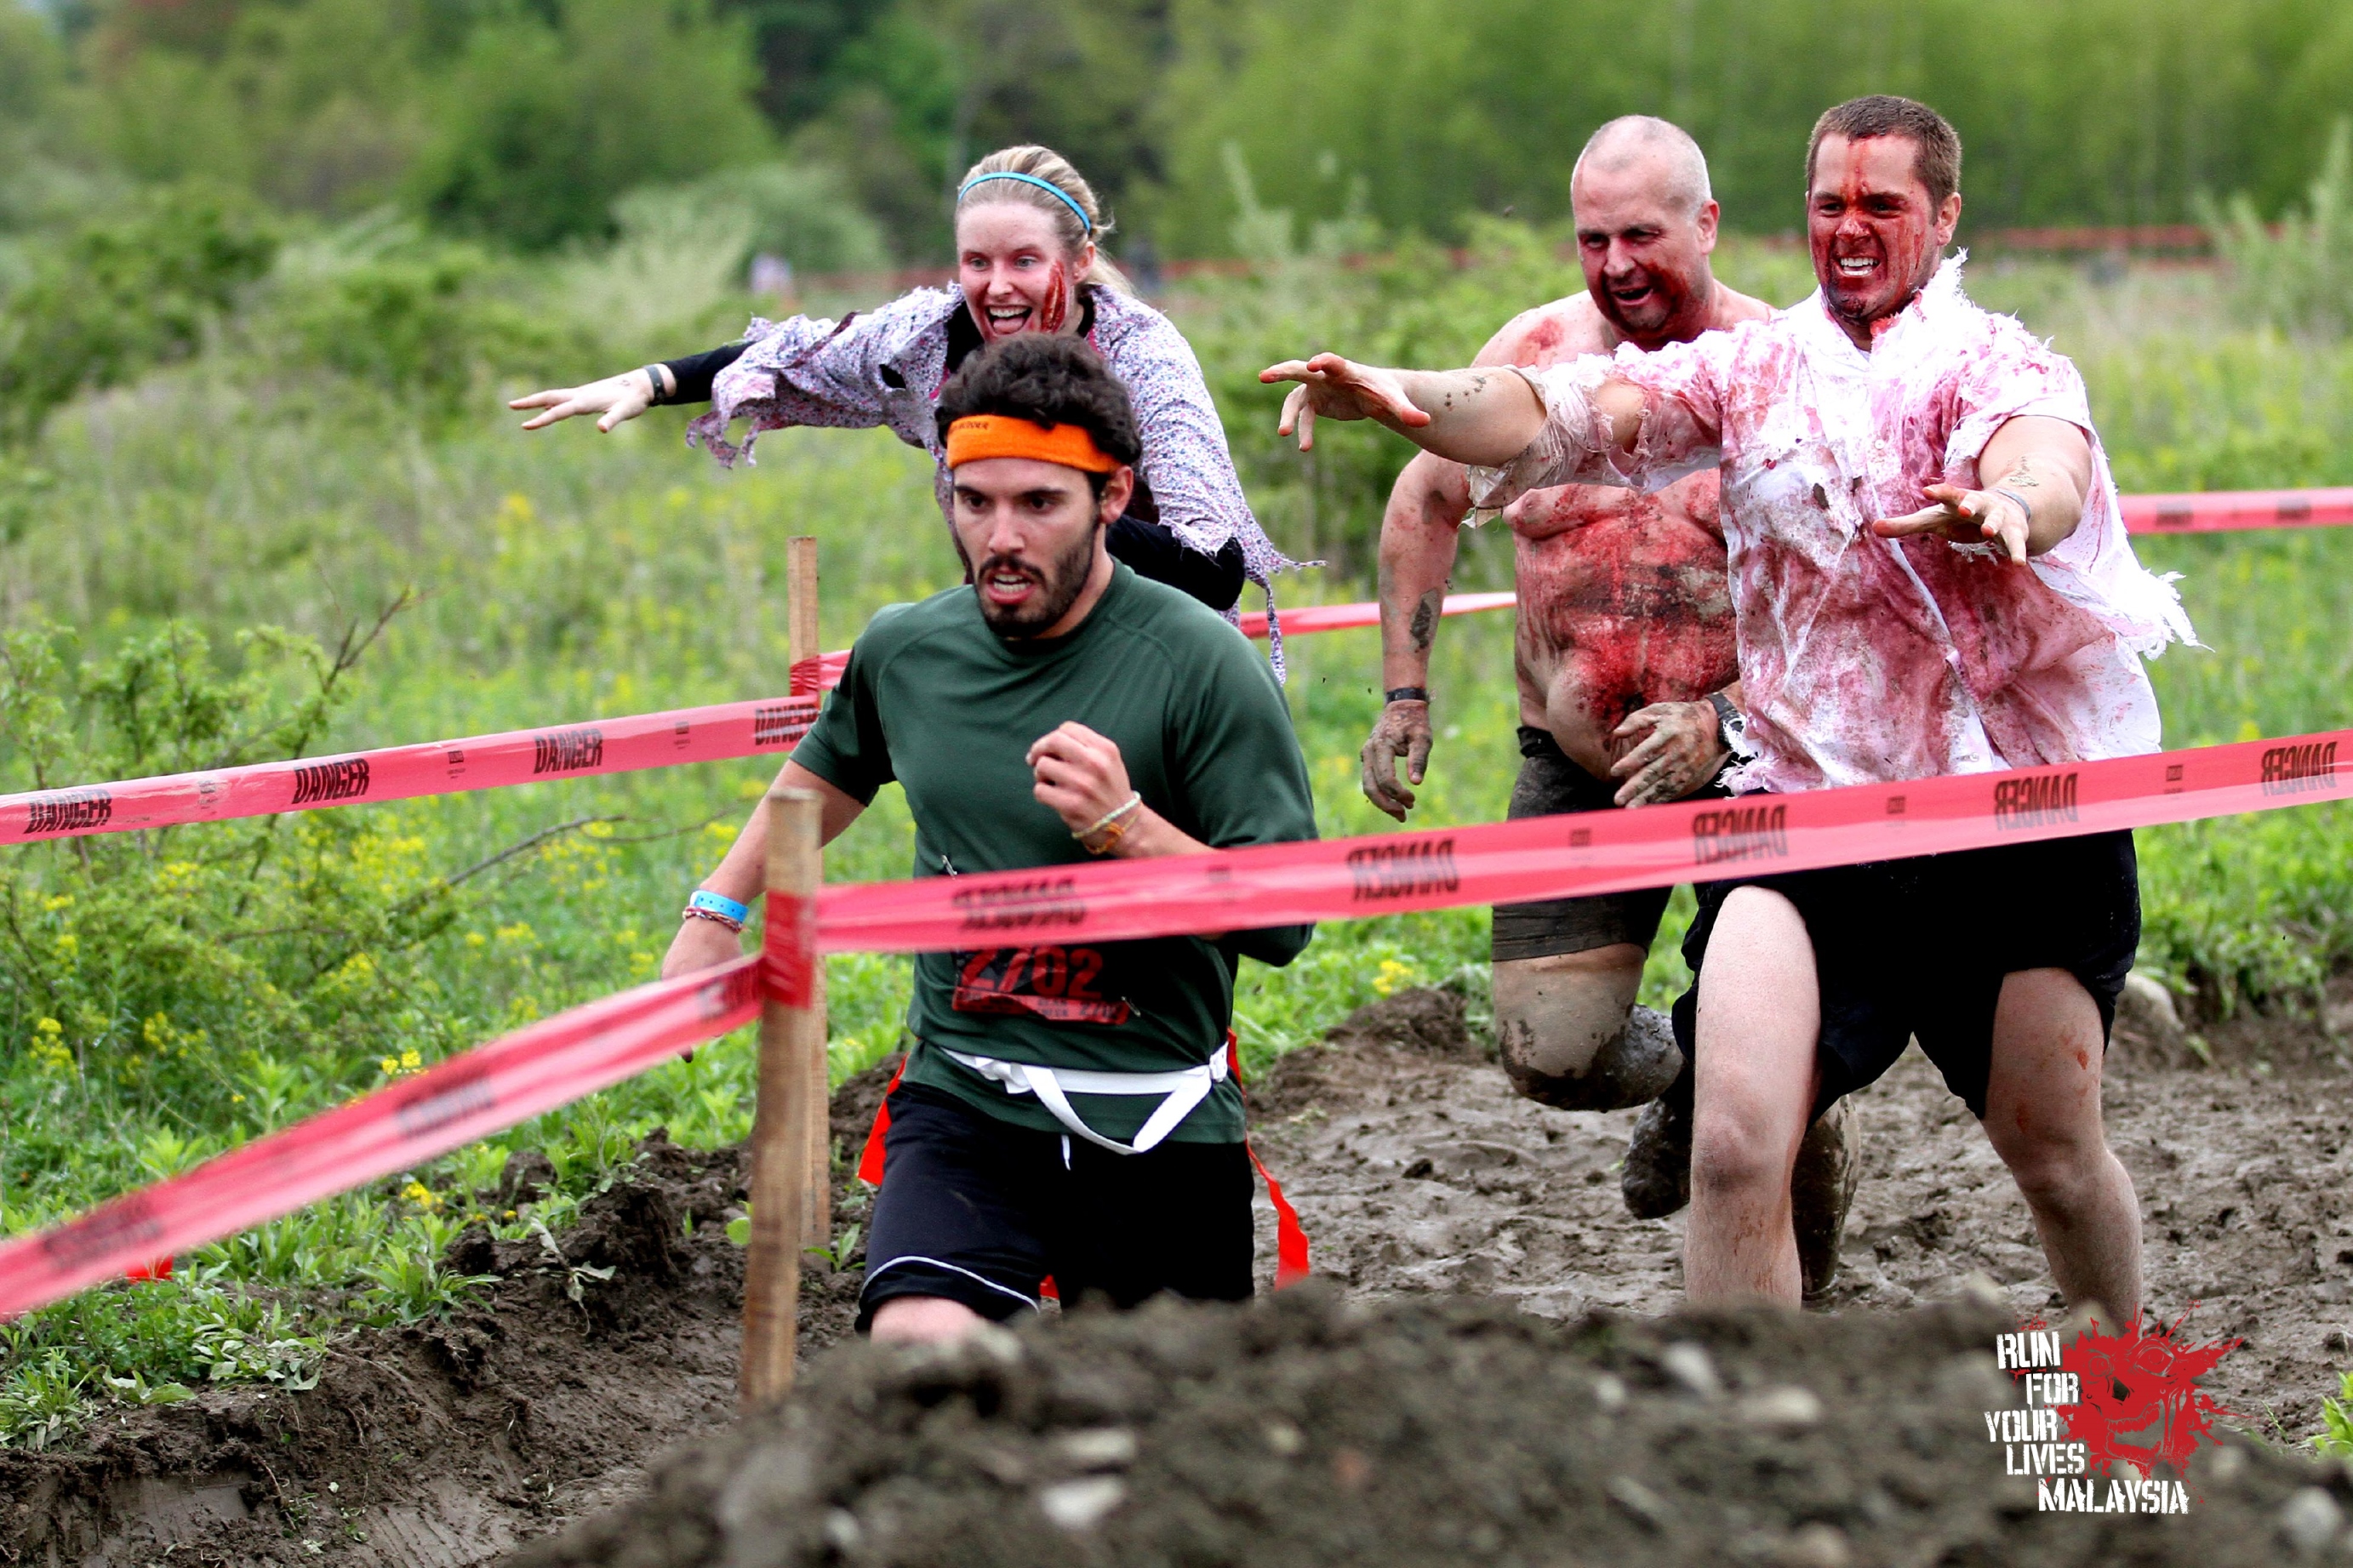 Choose to run as a ‘Survivor’ (human) or a Zombie in Run For Your Lives.